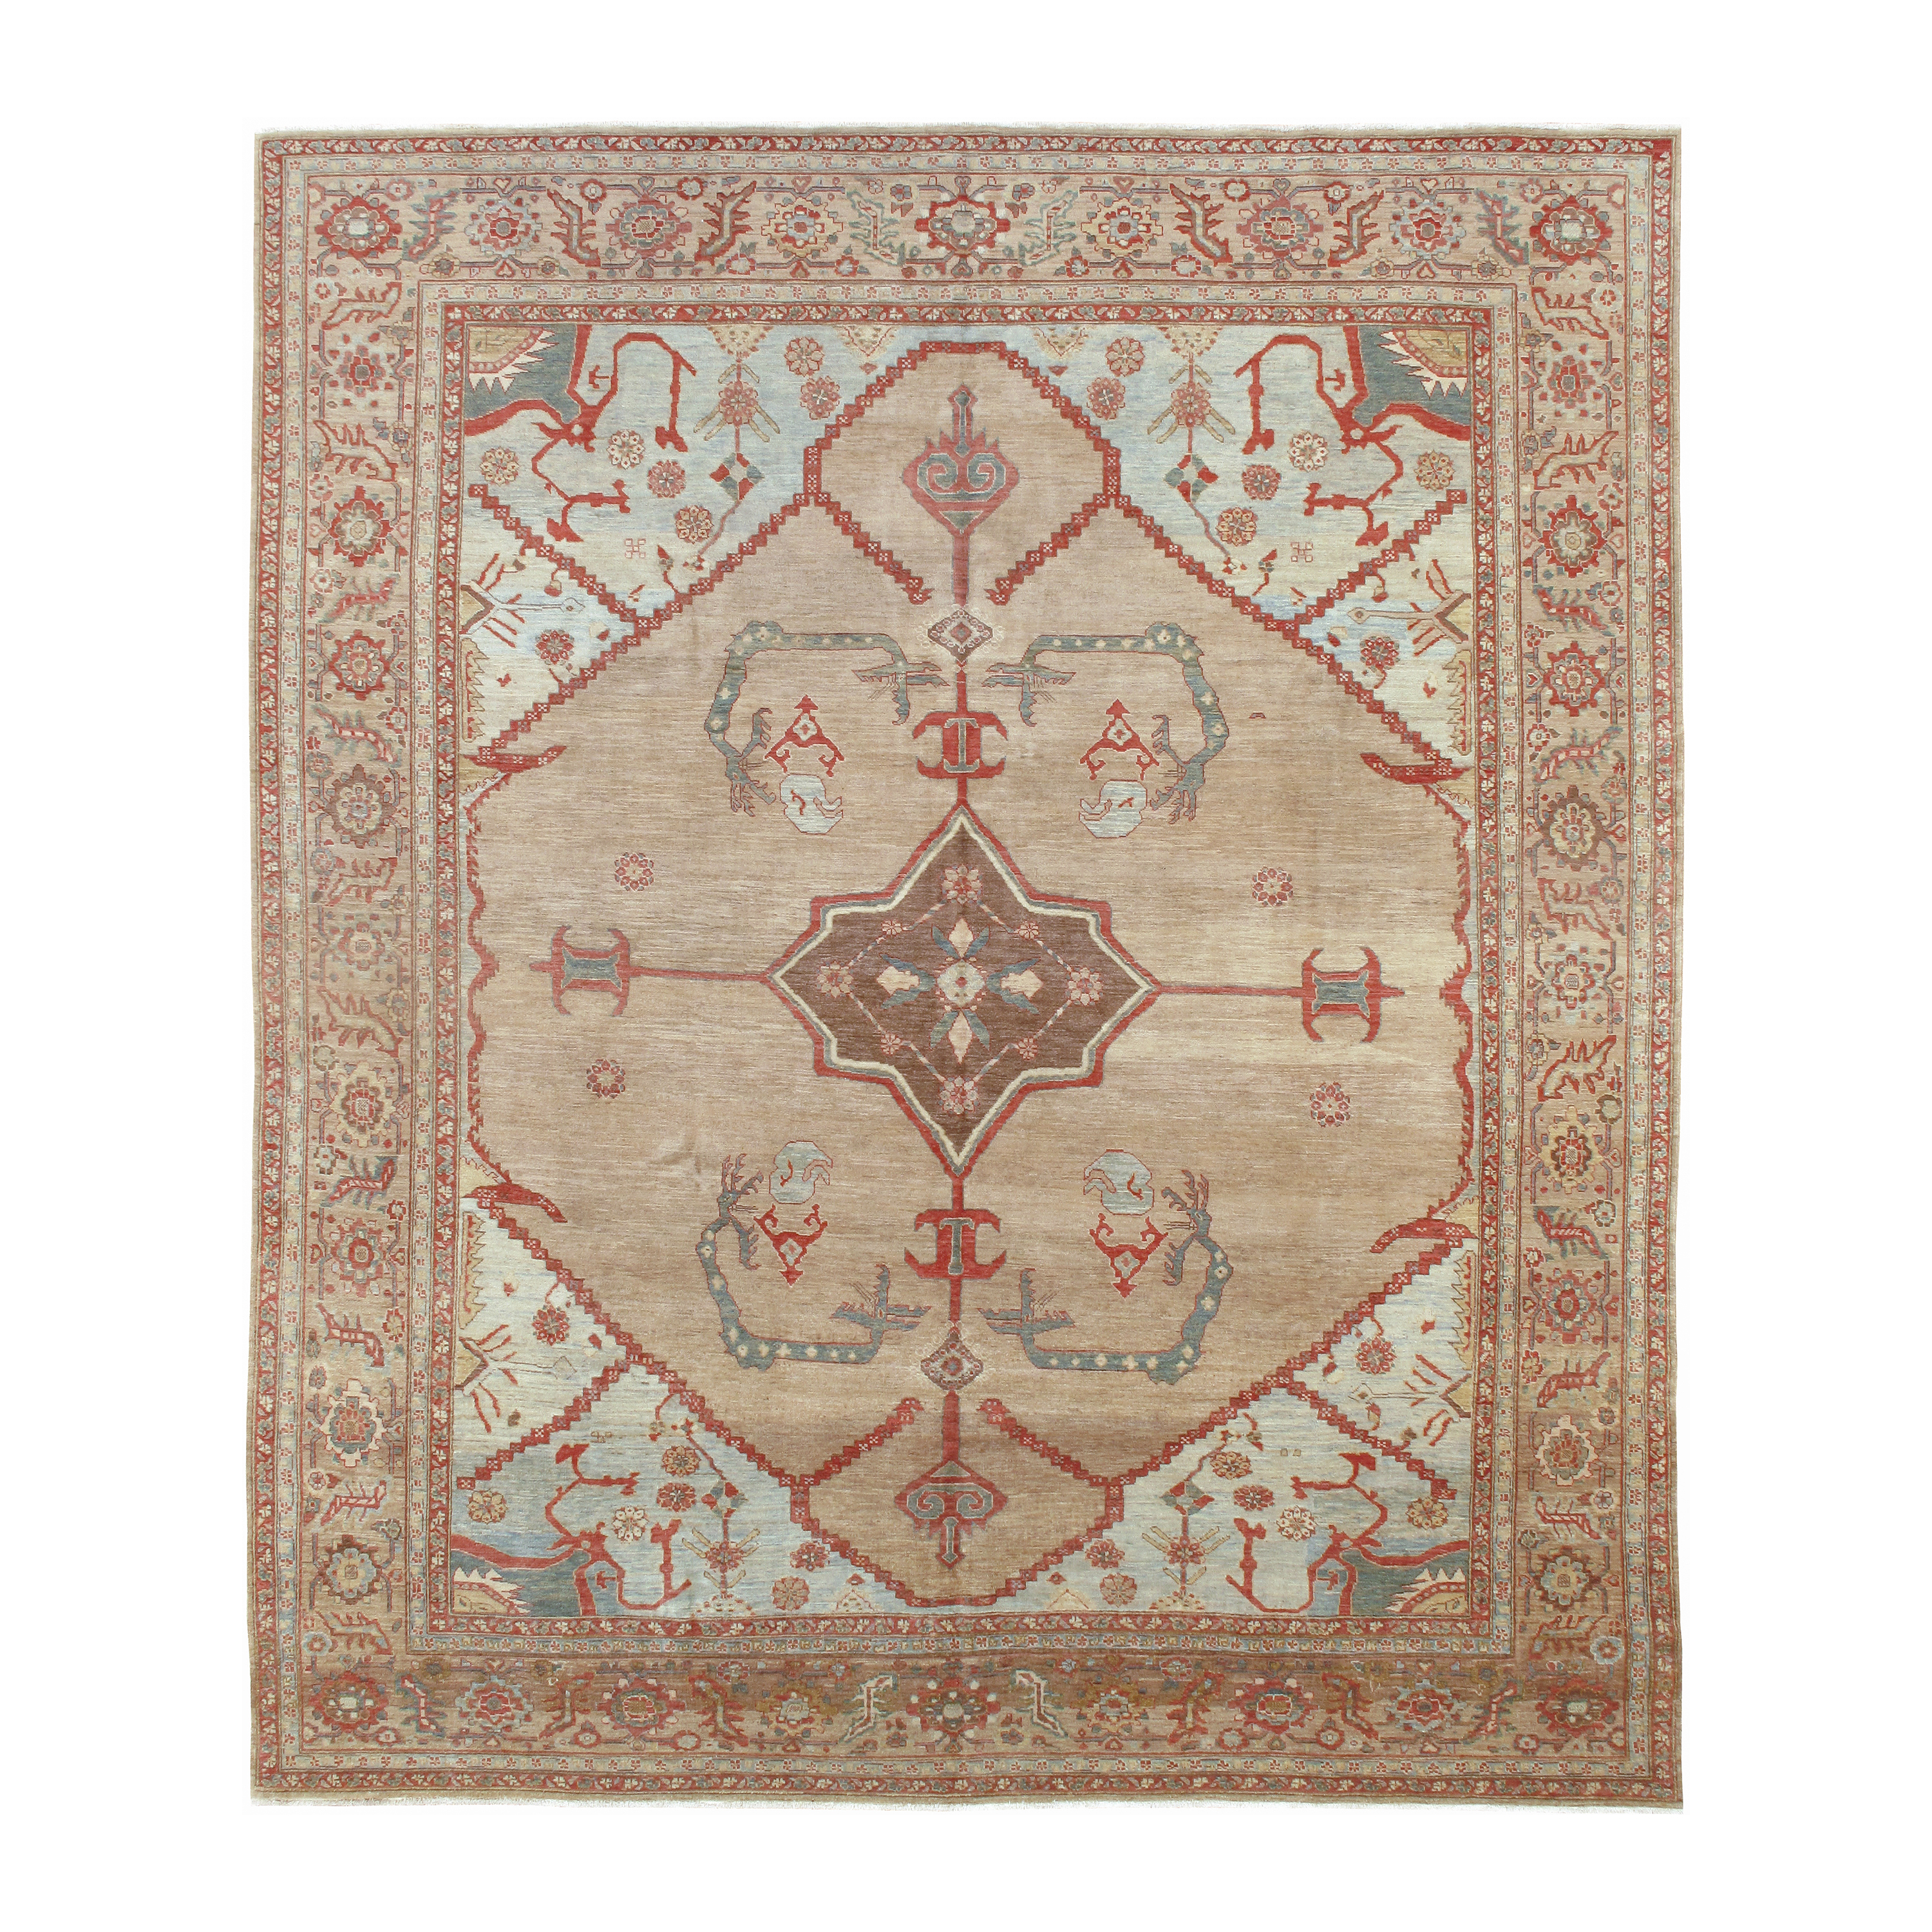 This Persian Bakshaish rug is hand-knotted and made of vegetable dye.